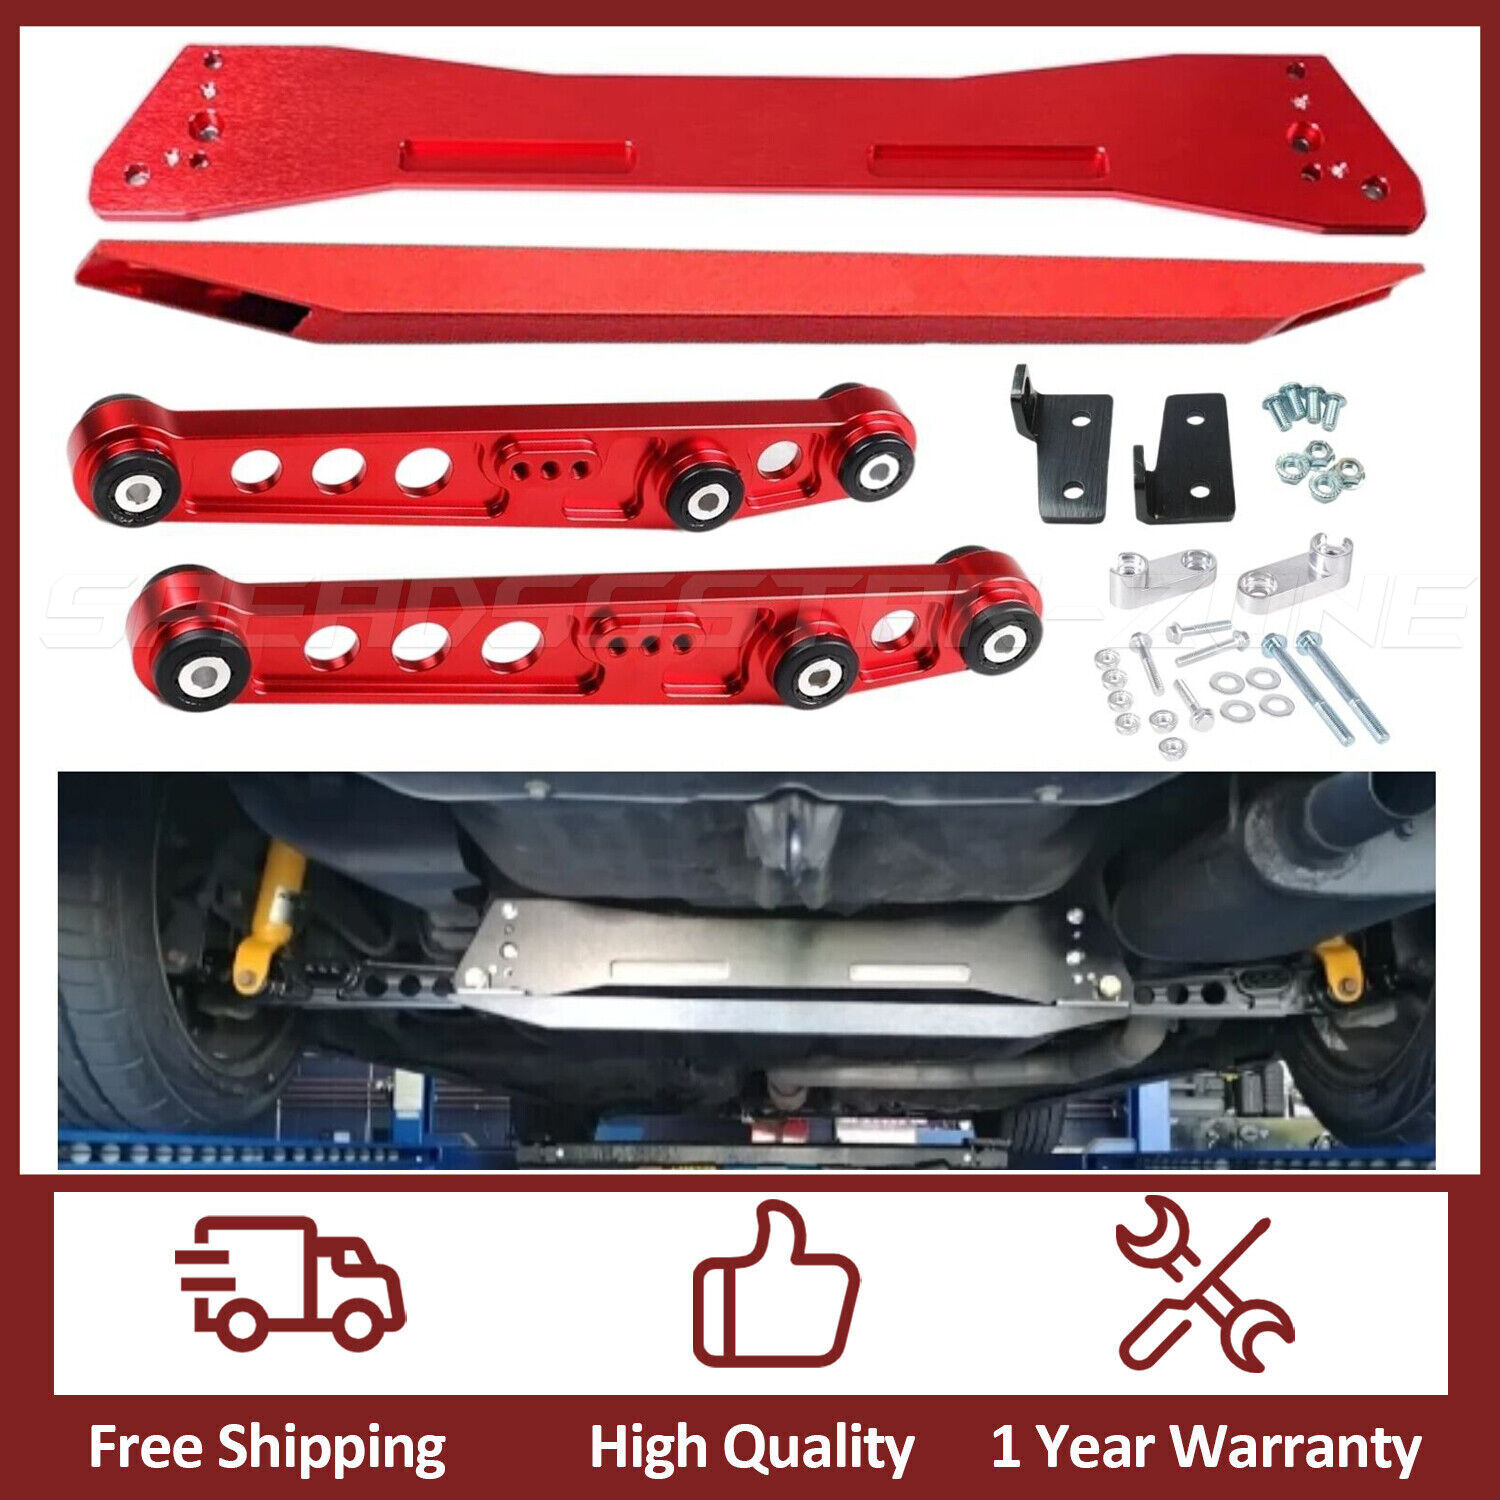 Red Rear Lower Control Arms + Subframe Brace + Tie Bar for Honda Civic EG 92-95